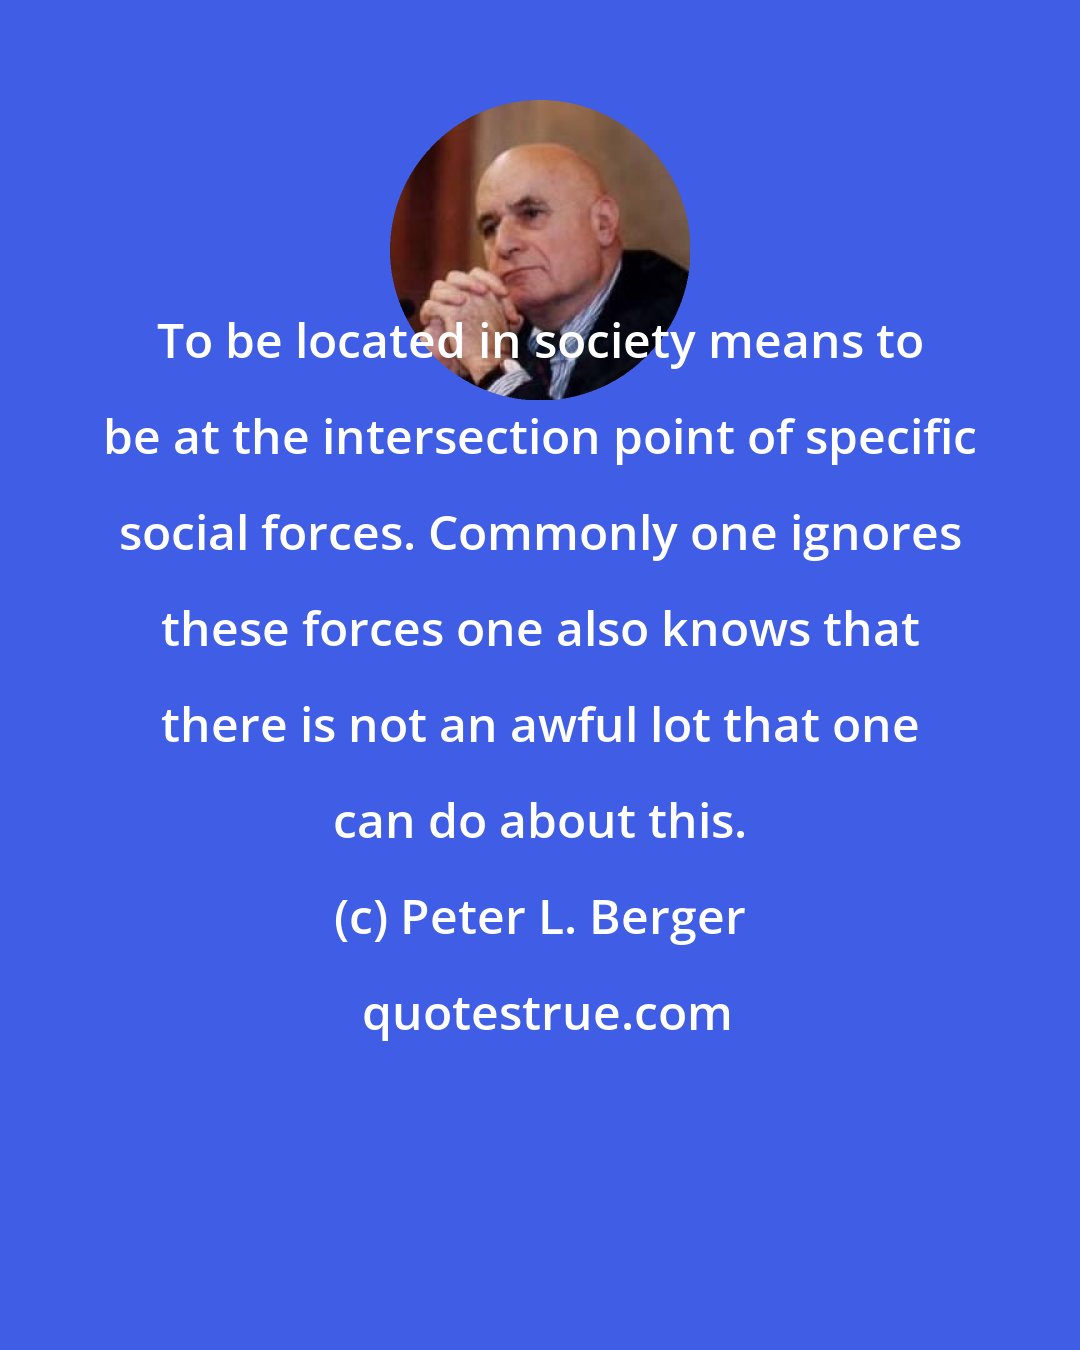 Peter L. Berger: To be located in society means to be at the intersection point of specific social forces. Commonly one ignores these forces one also knows that there is not an awful lot that one can do about this.